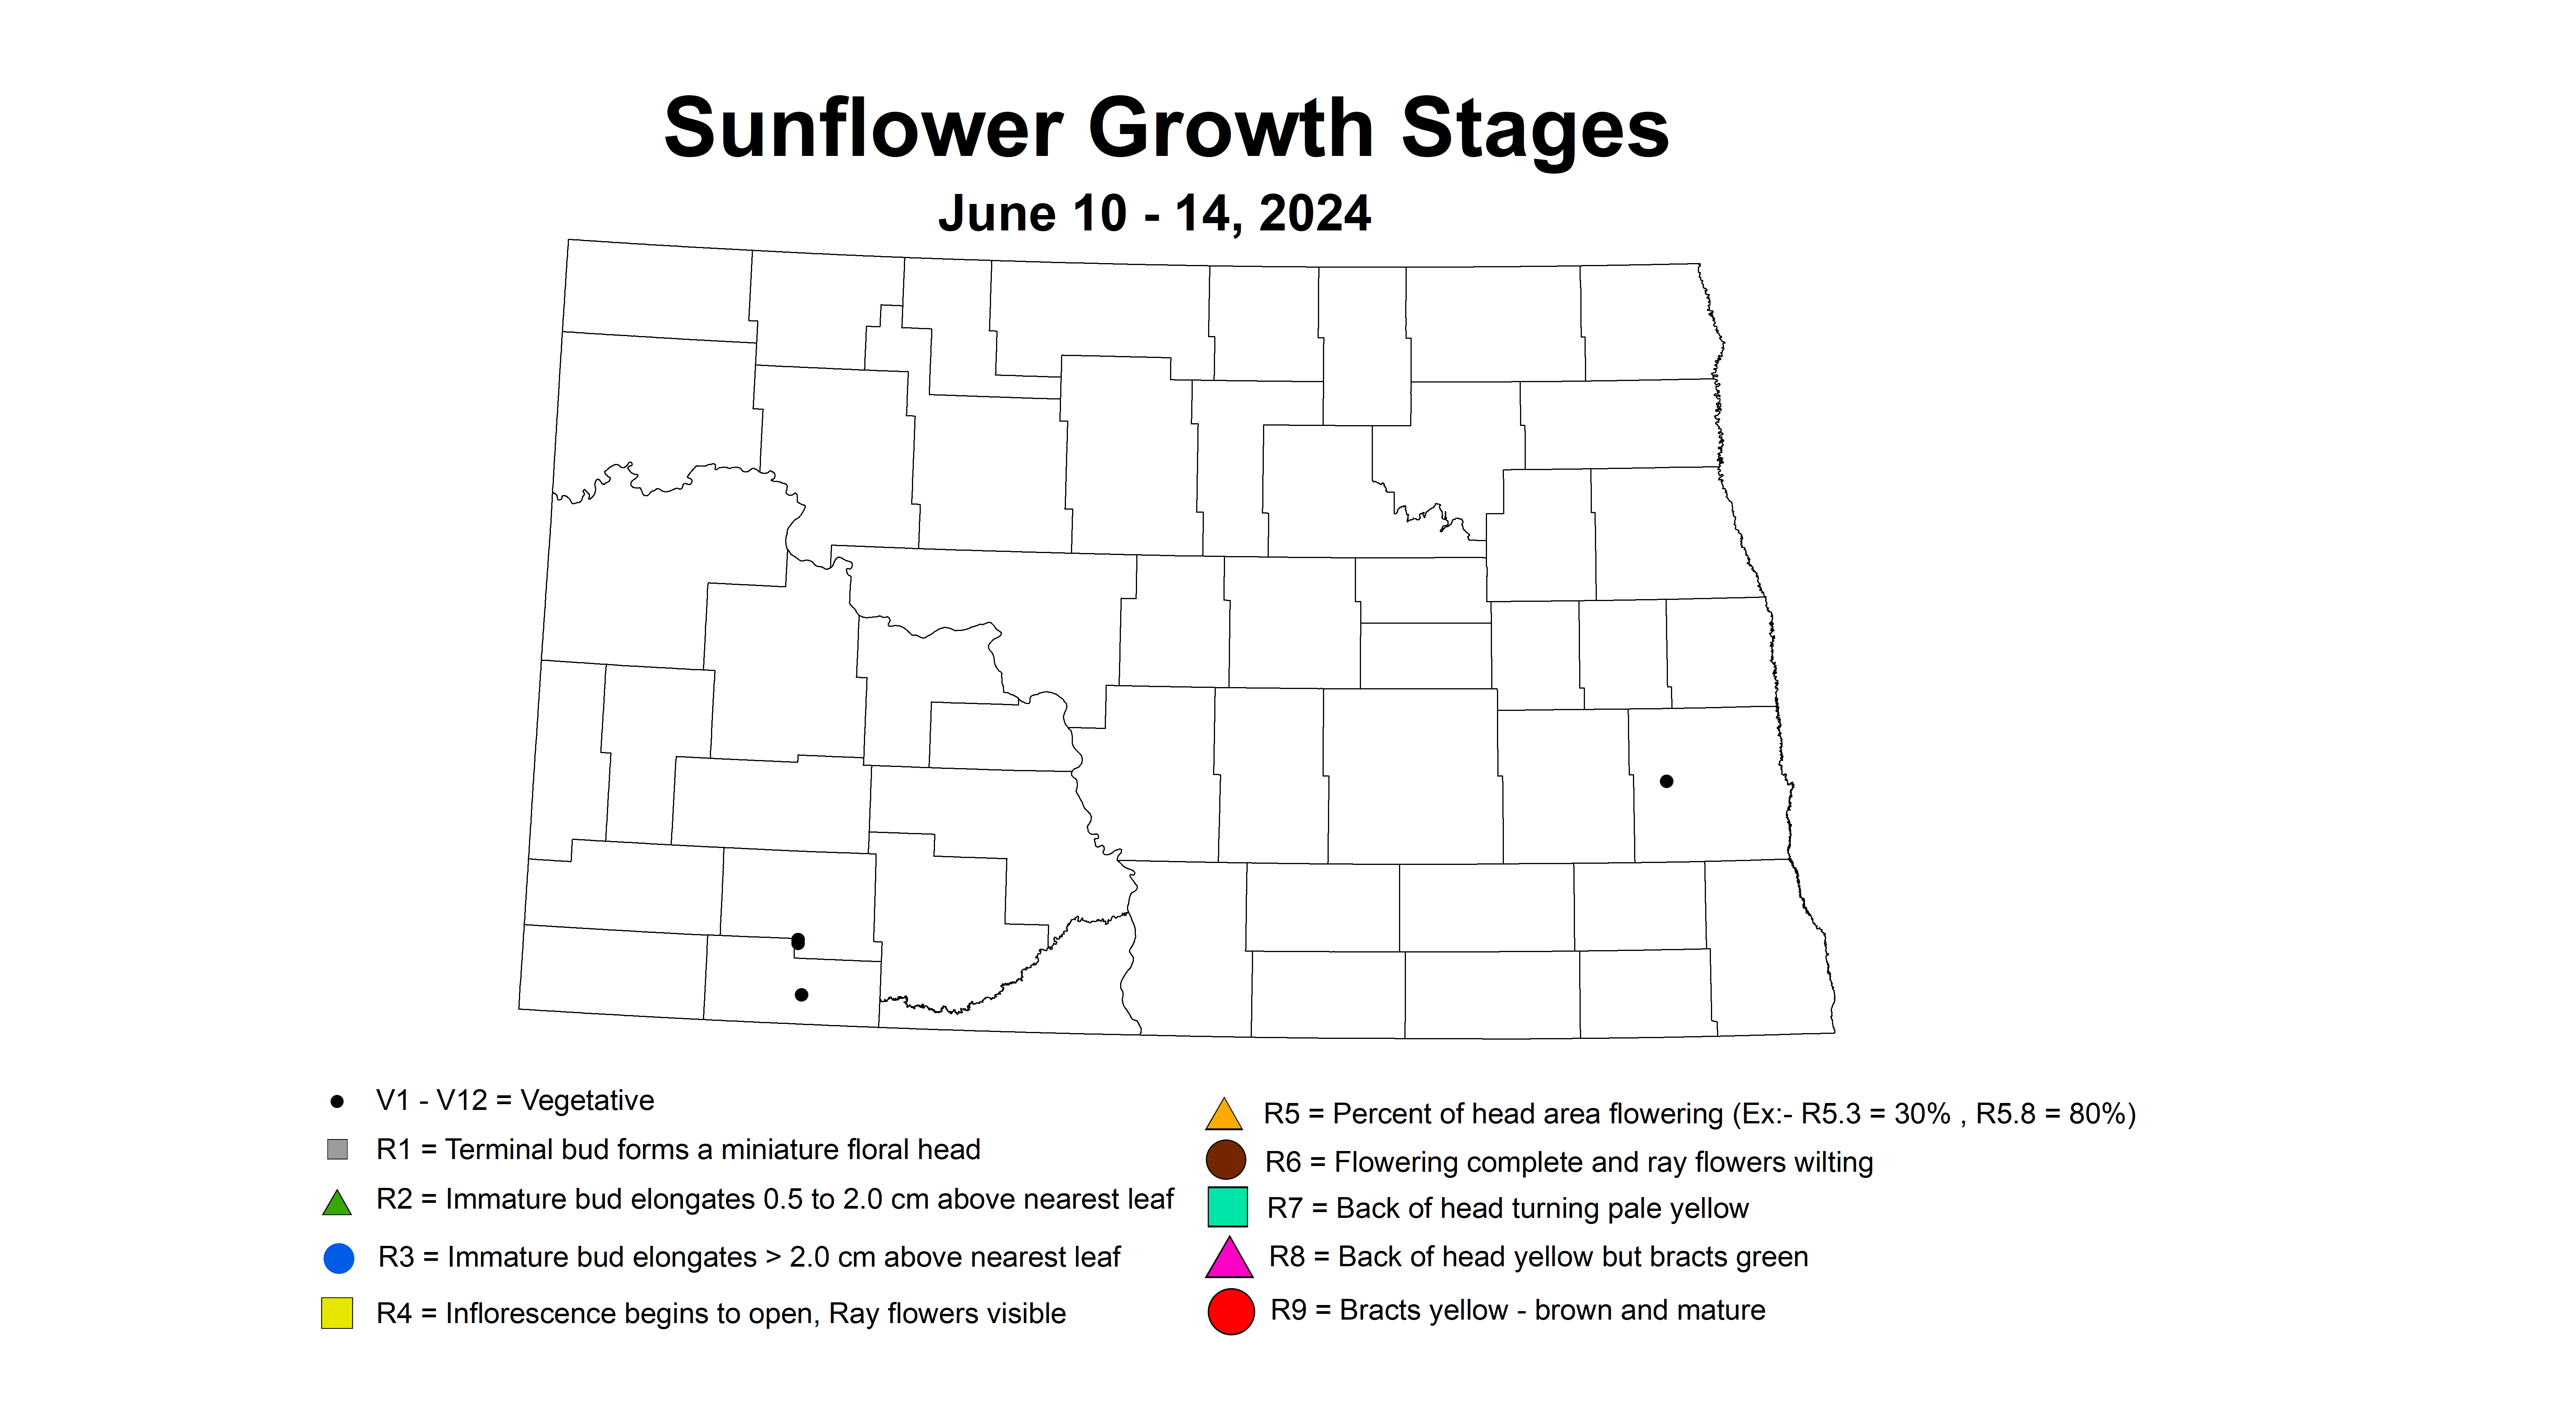 sunflower growth stages June 10-14 2024 corrected